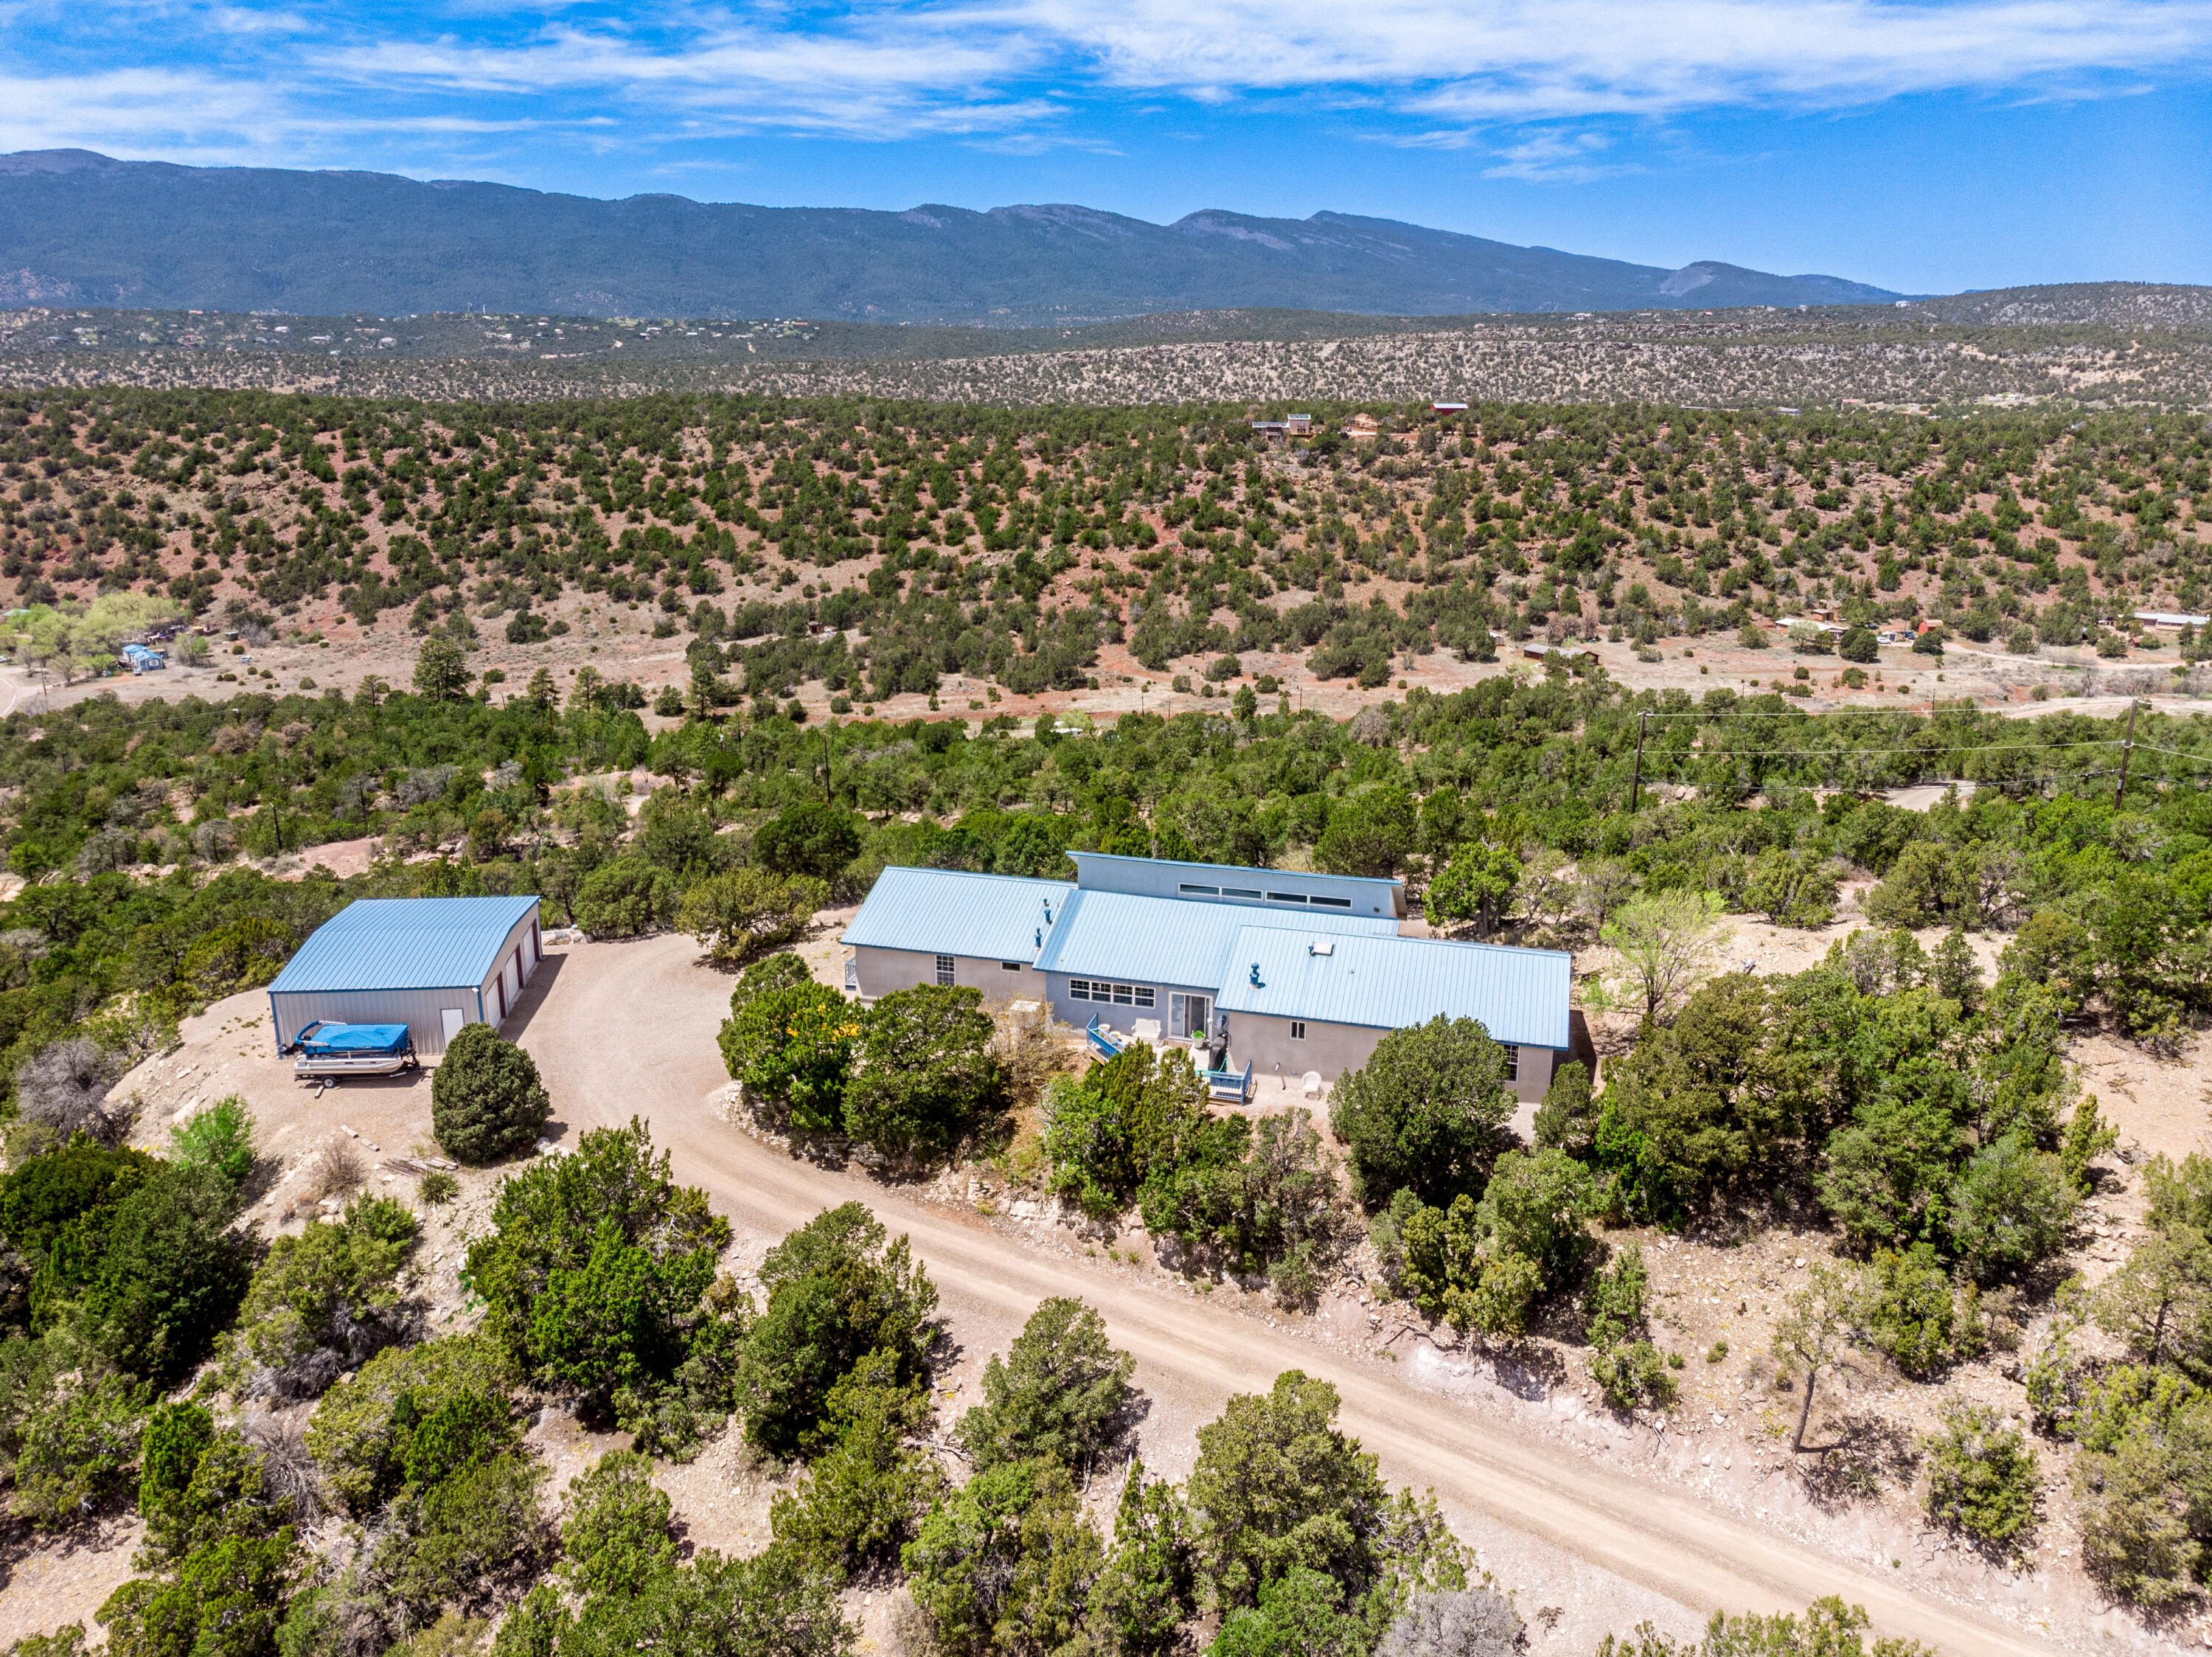 This charming 3-bedroom, 2-bathroom home is located on its own private mountain top in Tijeras. The home sits on a spacious lot with mature trees and natural landscaping providing plenty of privacy and shade. Inside the home features an open floor plan with a cozy pellet stove in the living room and a large deck off the dining area, perfect for entertaining. Plenty of room for toys or hobbies in the 3-car detached garage/shop. Located just minutes from hiking trails and other outdoor recreation opportunities. This home is the perfect retreat for those seeking a peaceful escape from the city.